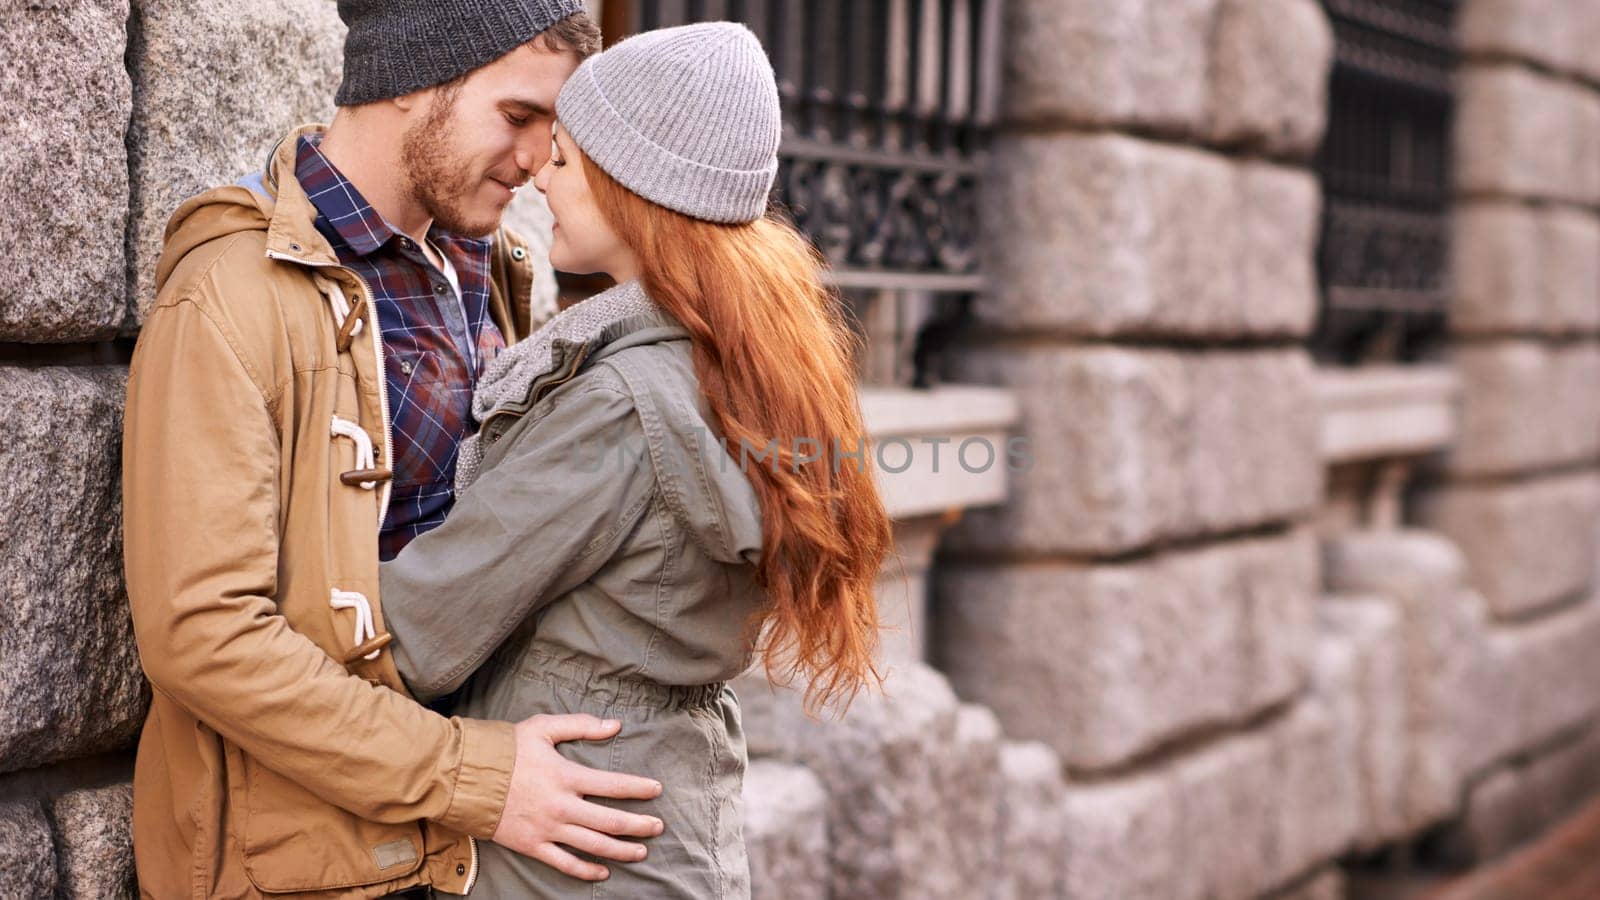 Couple, love and kiss with smile in outdoor or against wall in cold weather, together and support in London. Relationship, affection and bonding for romance with care, happiness and kindness.